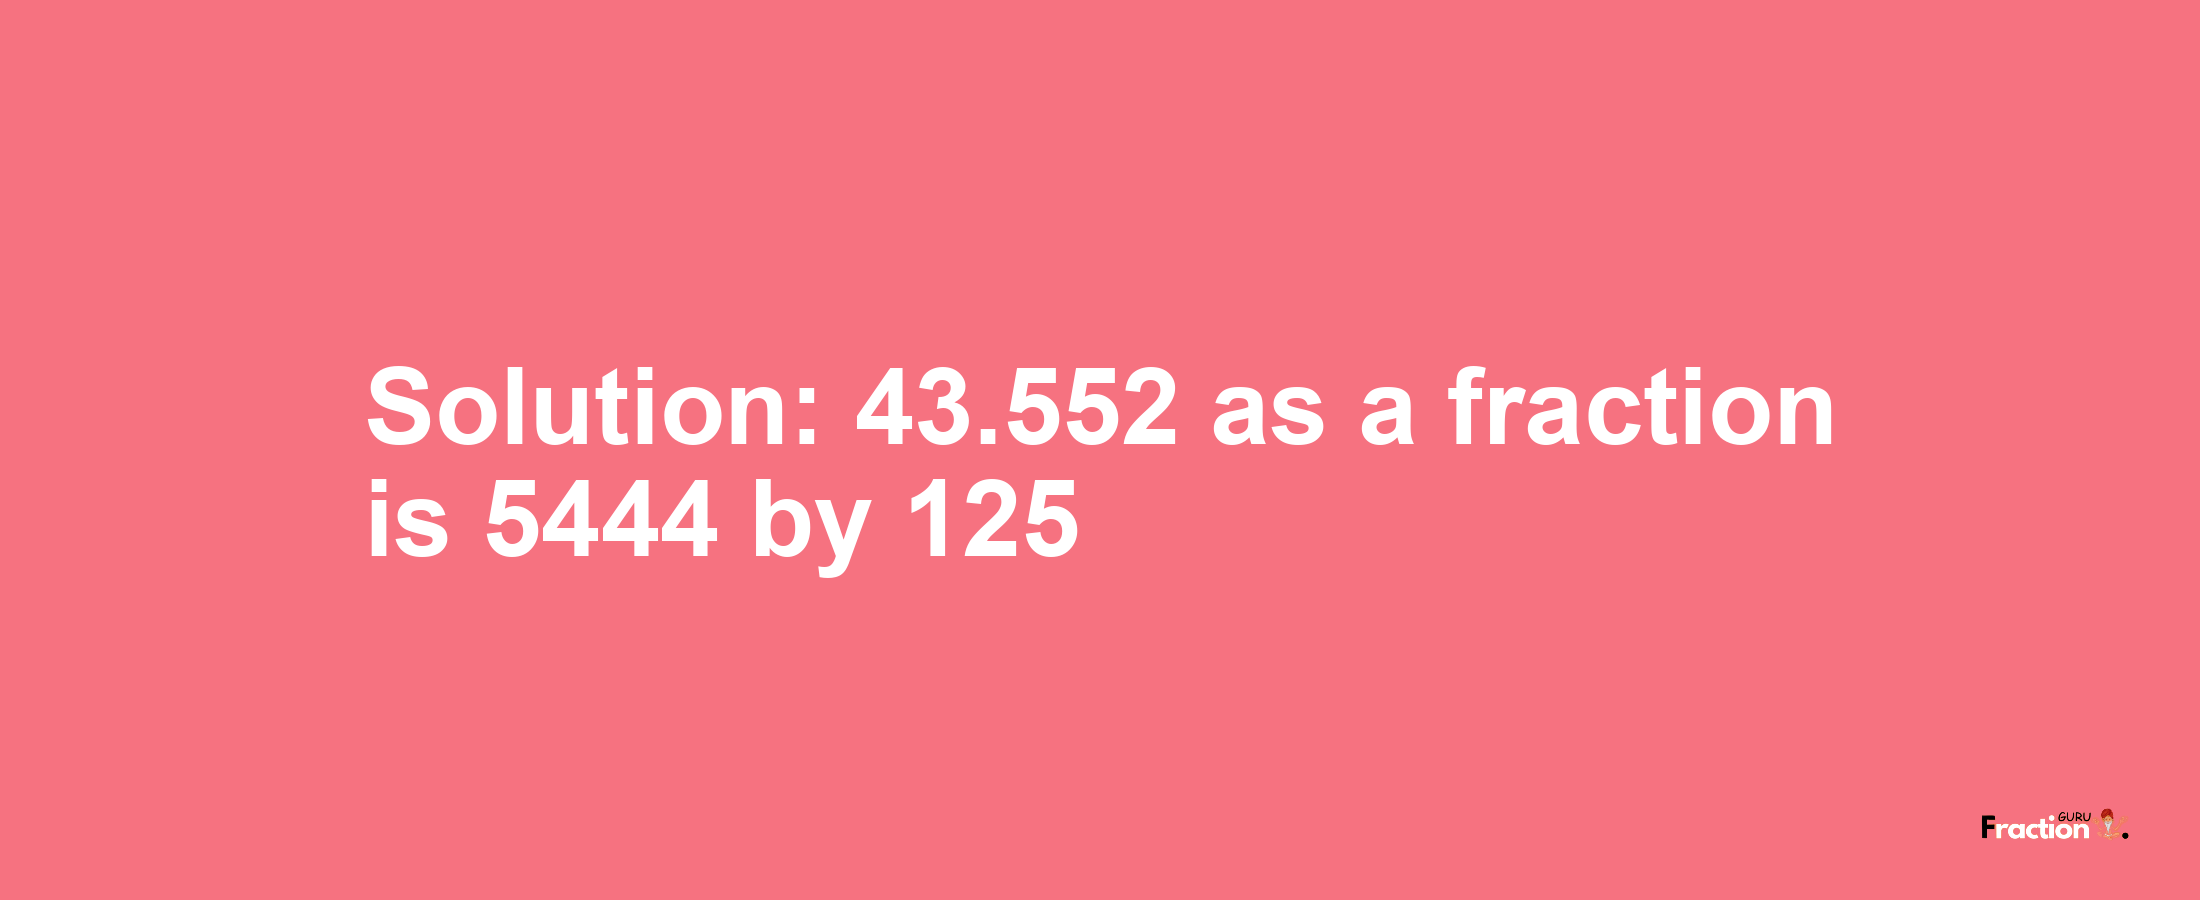 Solution:43.552 as a fraction is 5444/125